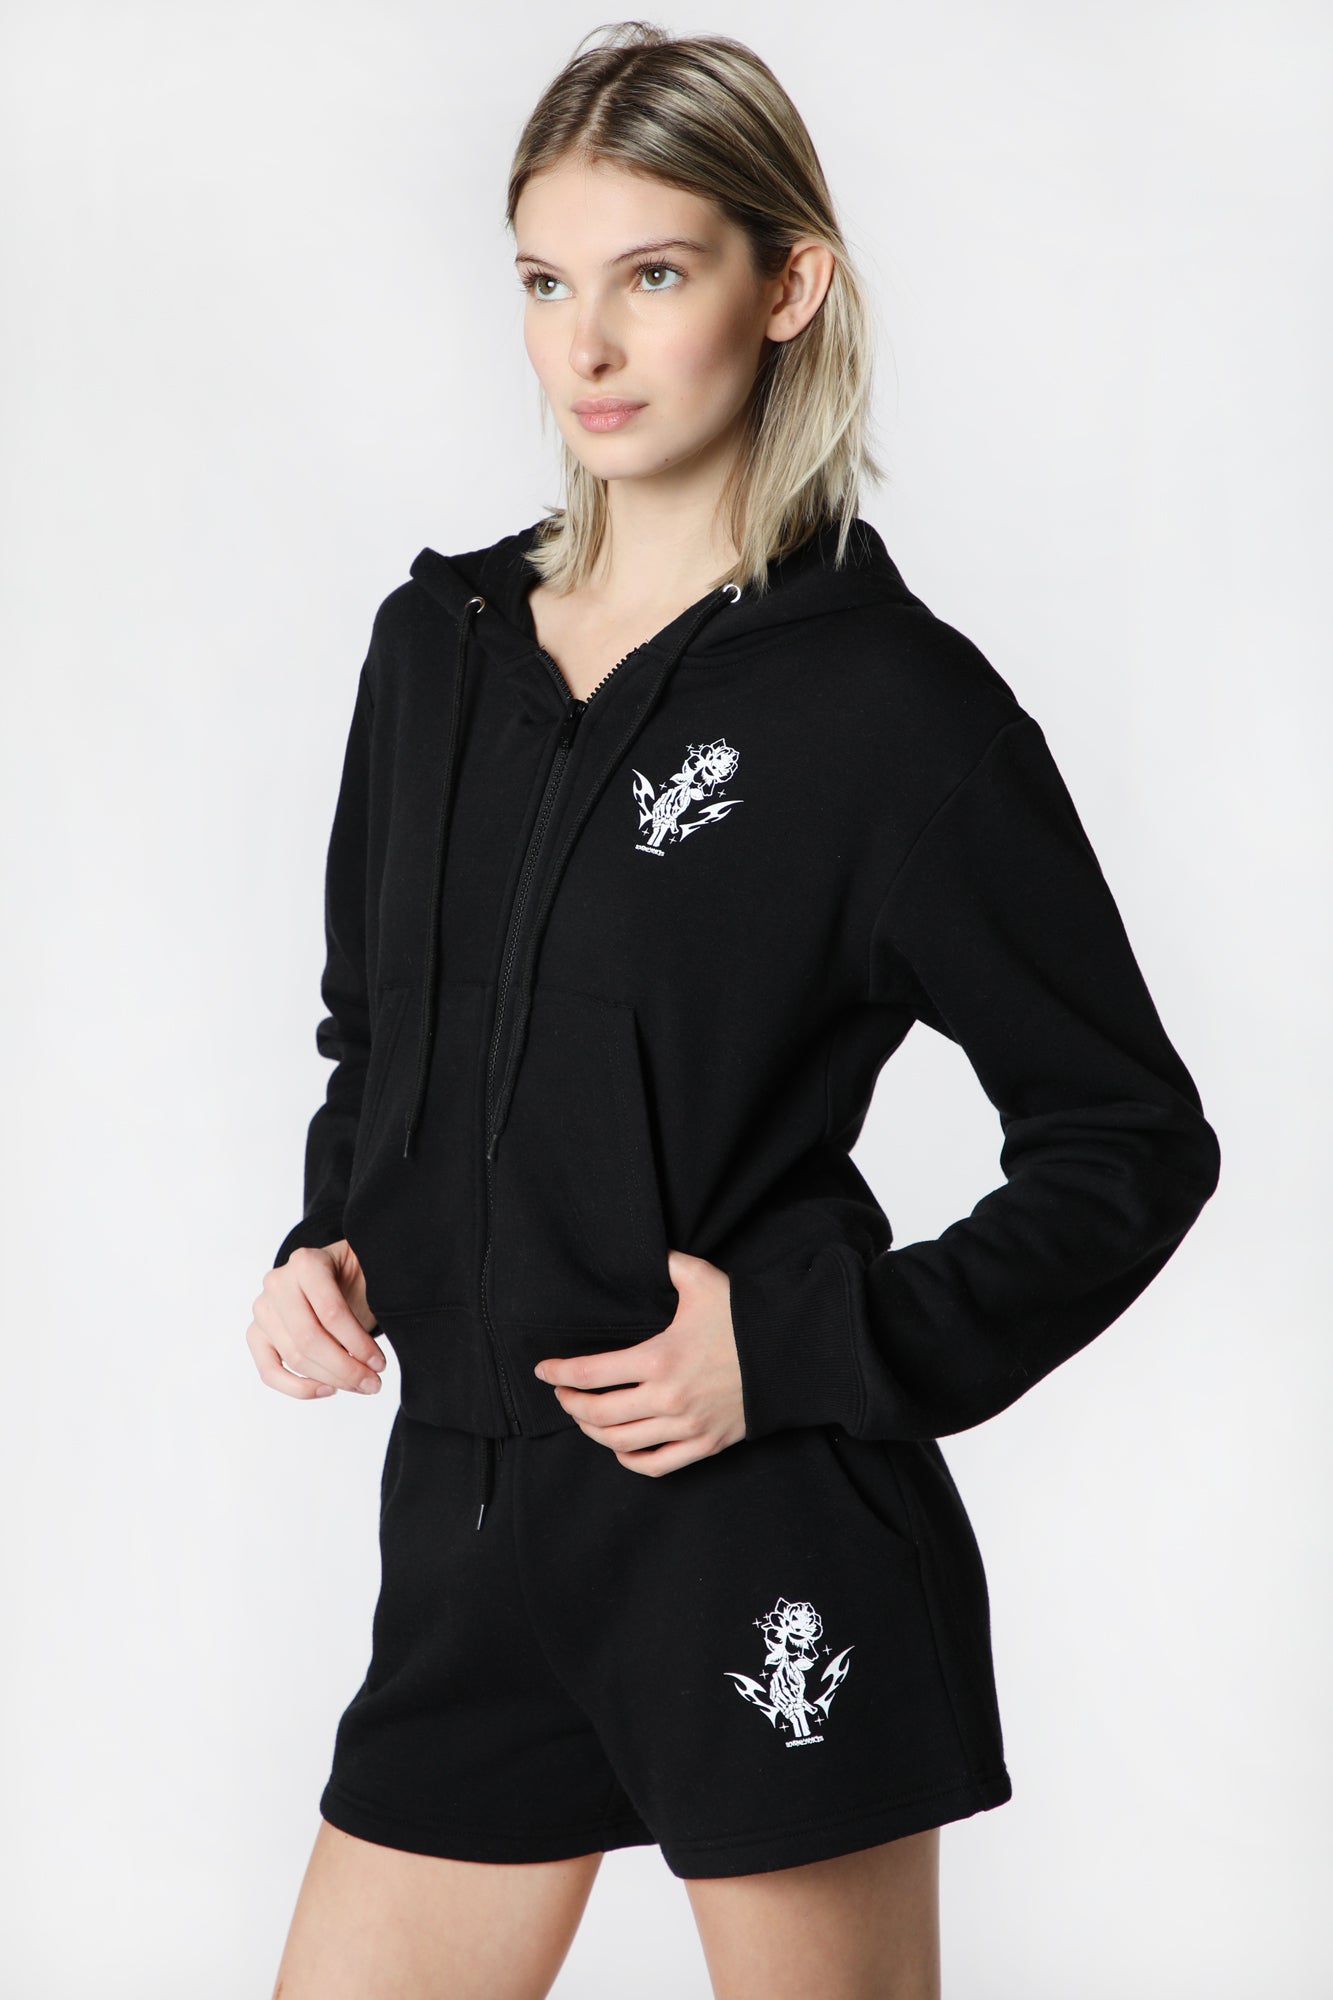 Womens Sovrn Voices Graphic Zip-Up Hoodie